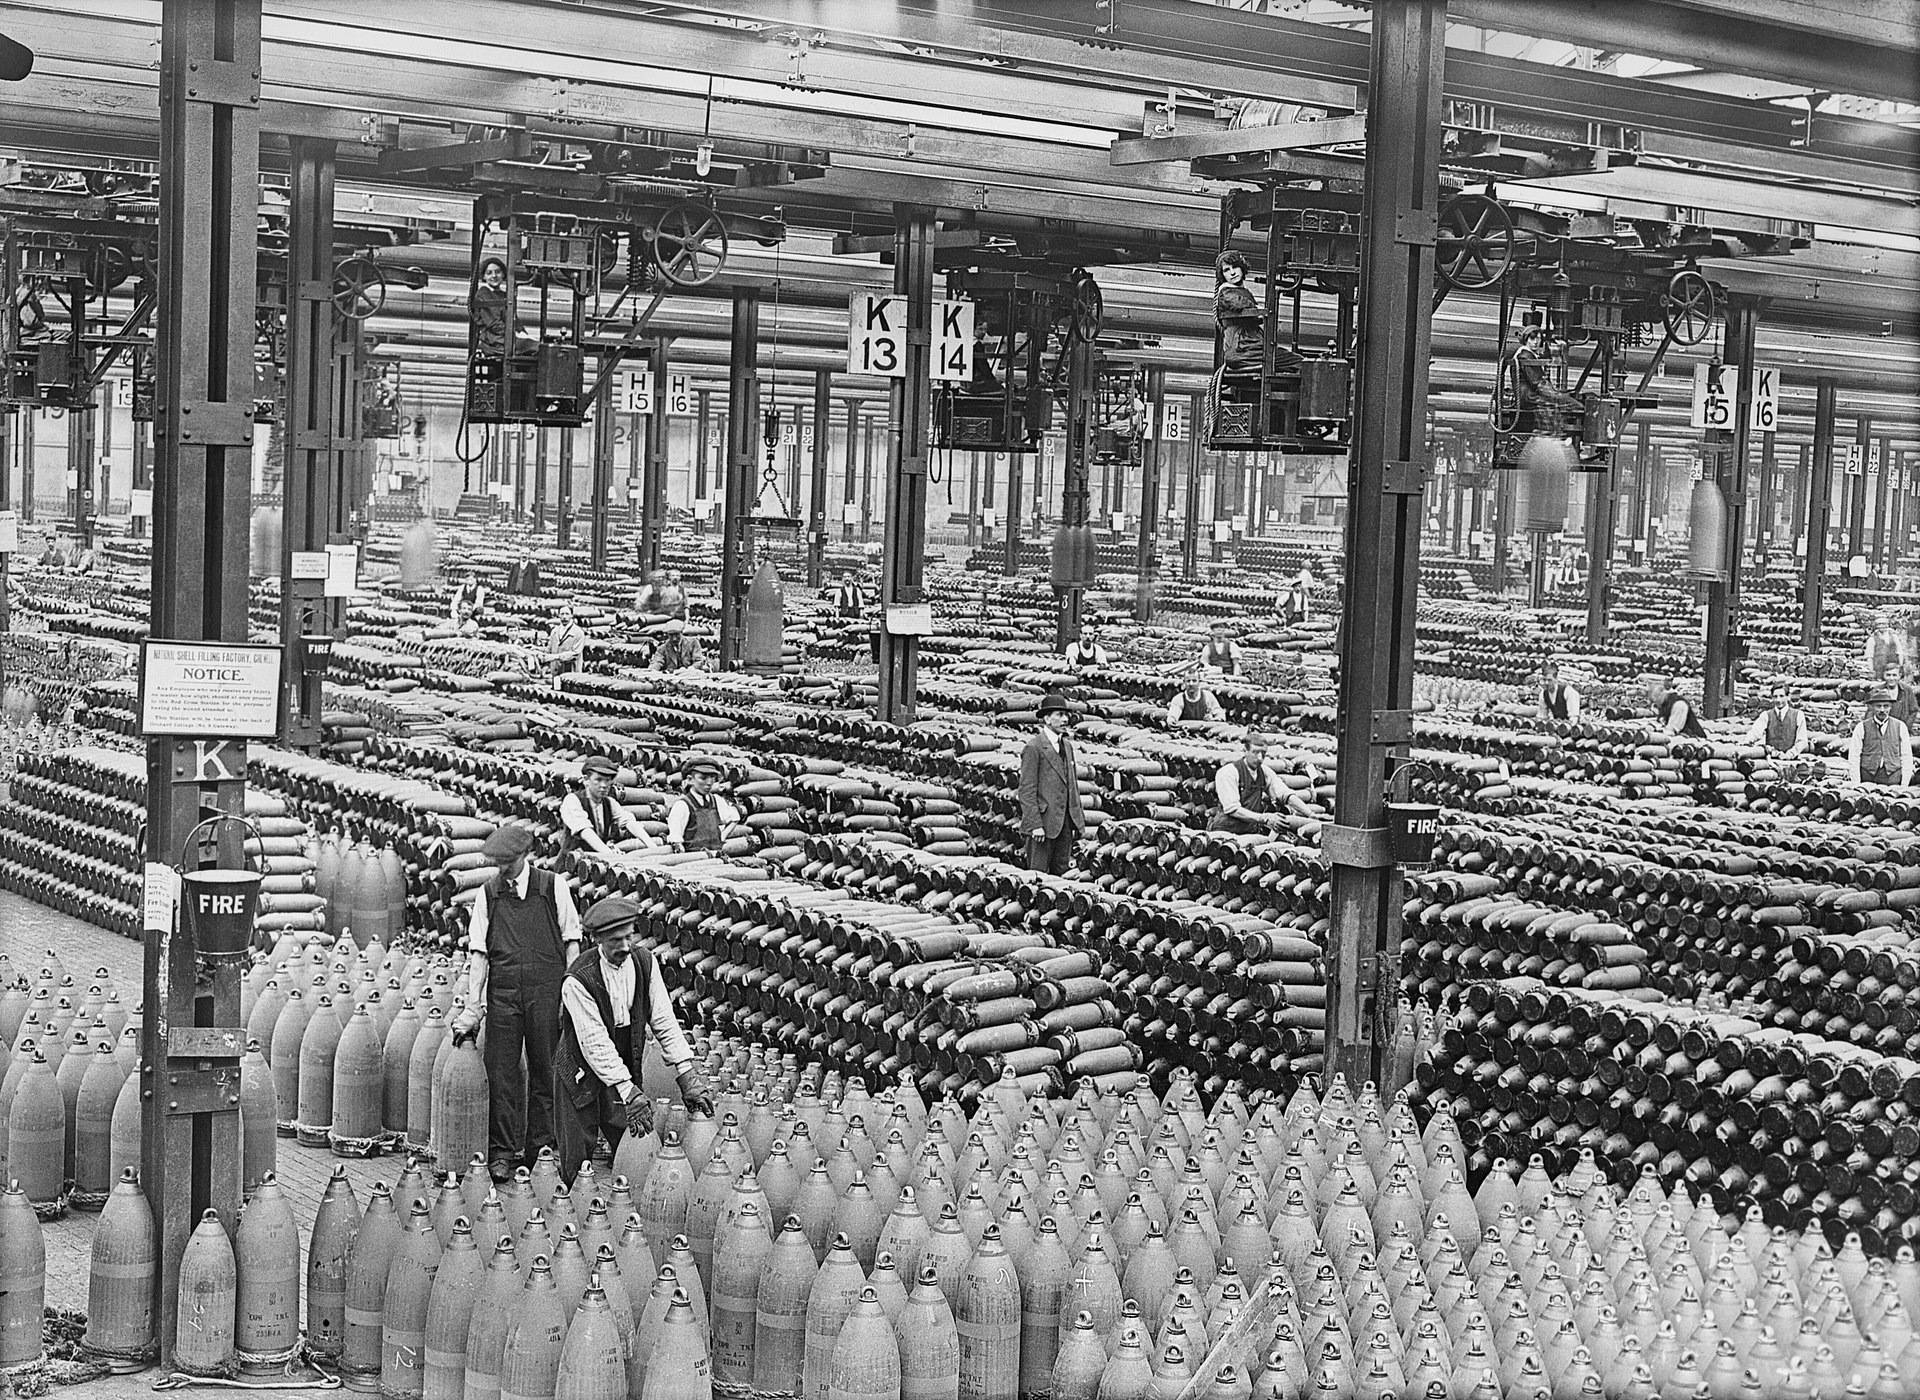 Stacks of shells in the National Shell Filling Factory in Chilwell, UK, 1917.